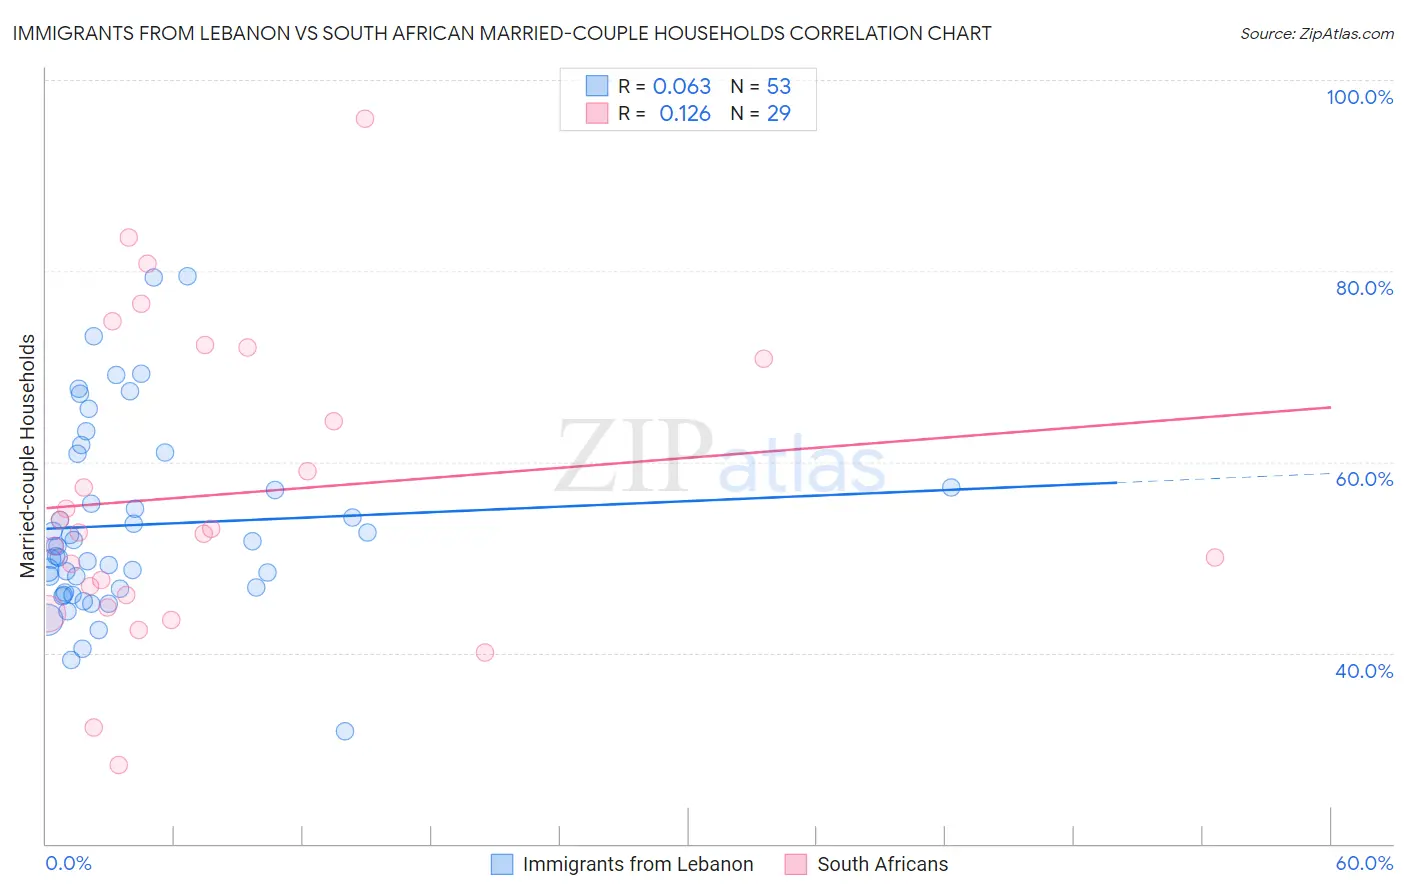 Immigrants from Lebanon vs South African Married-couple Households